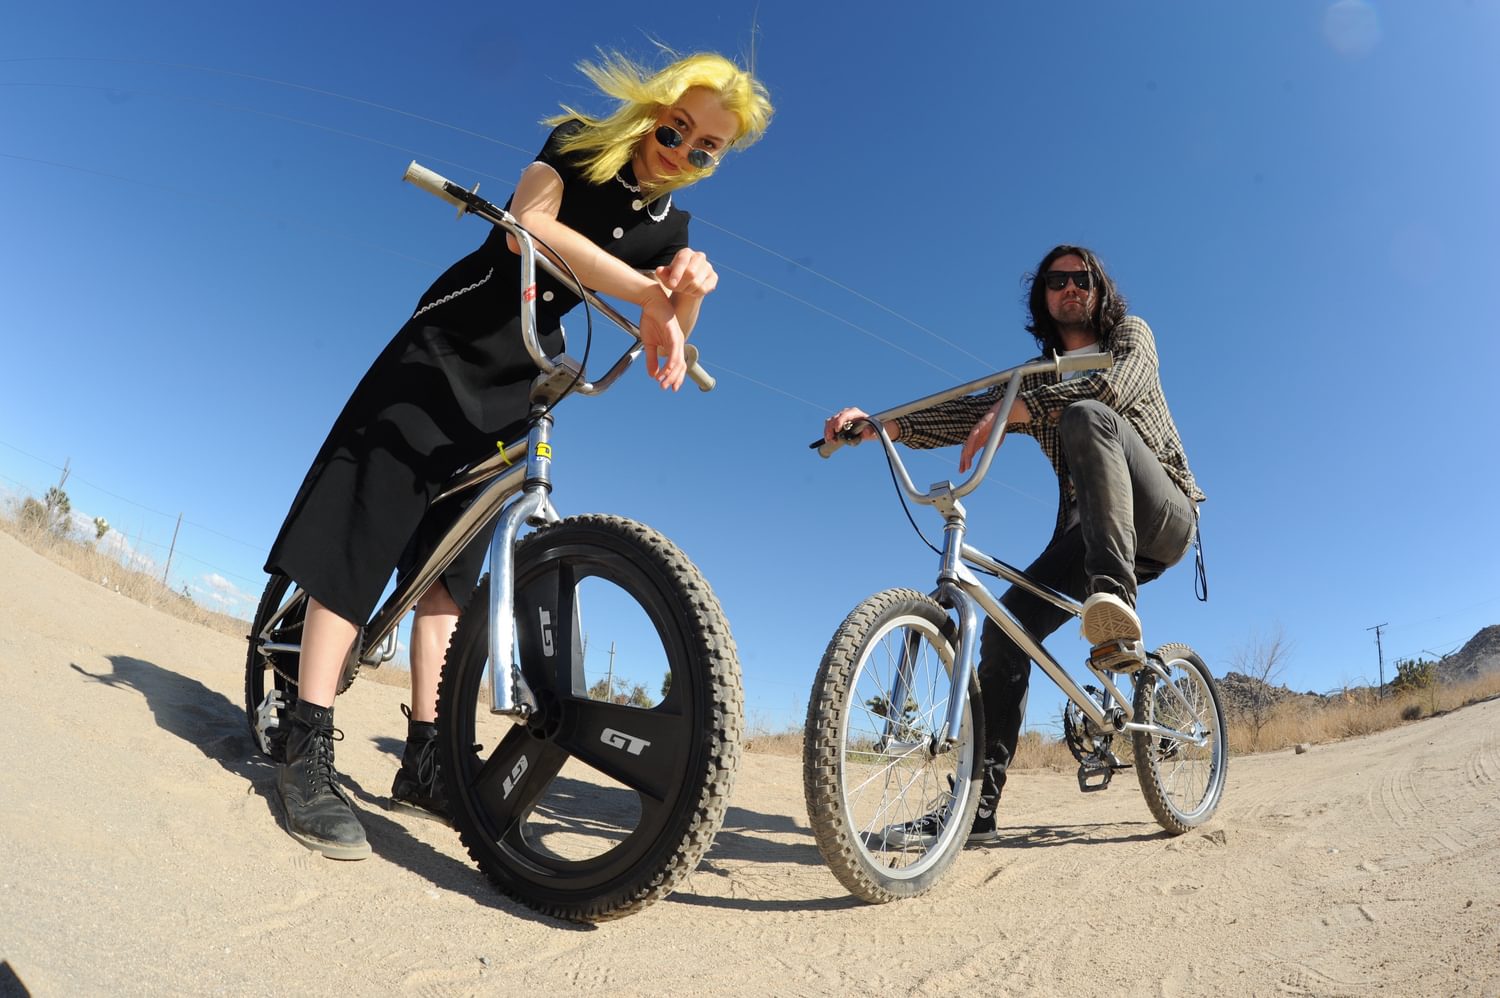 Phoebe Bridgers and Conor Oberst welcome you to the Better Oblivion Community Center